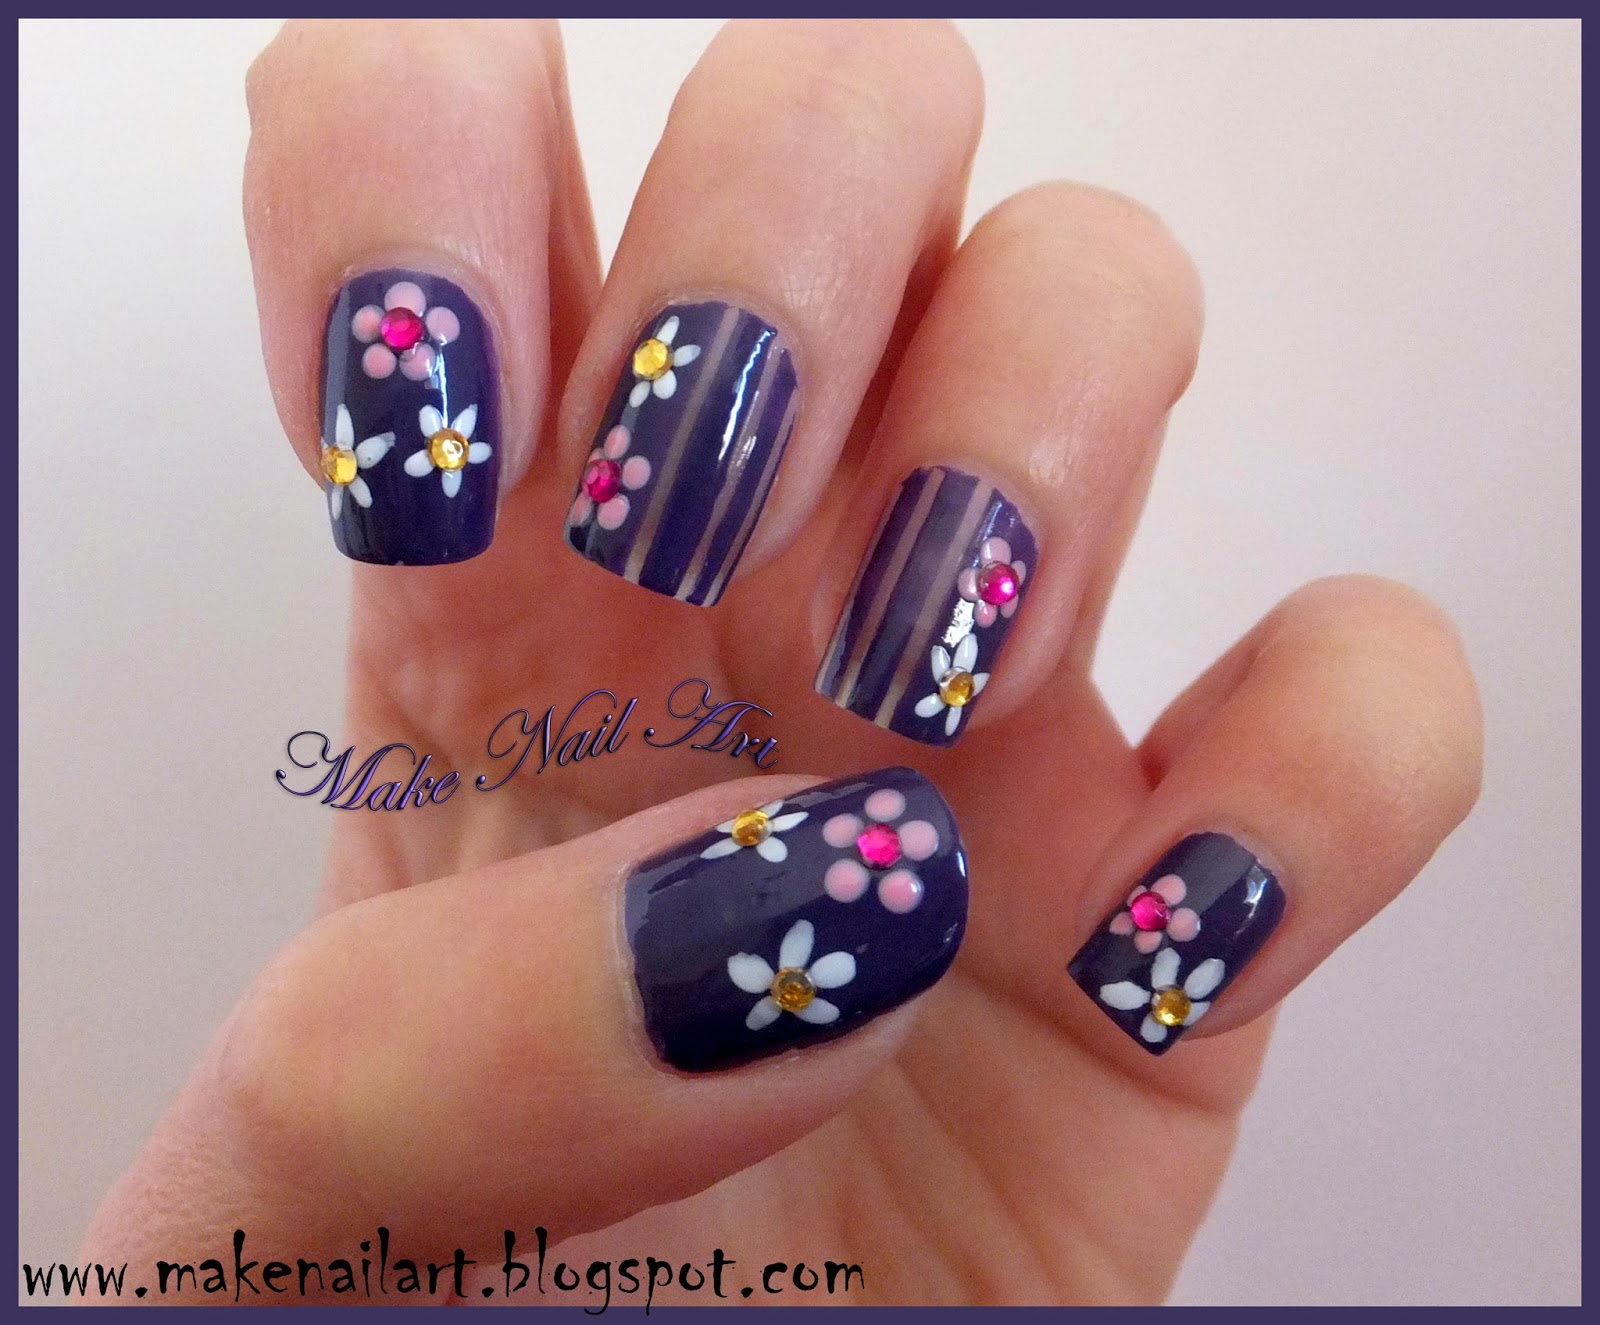 2. Easy Spring Nails - wide 5